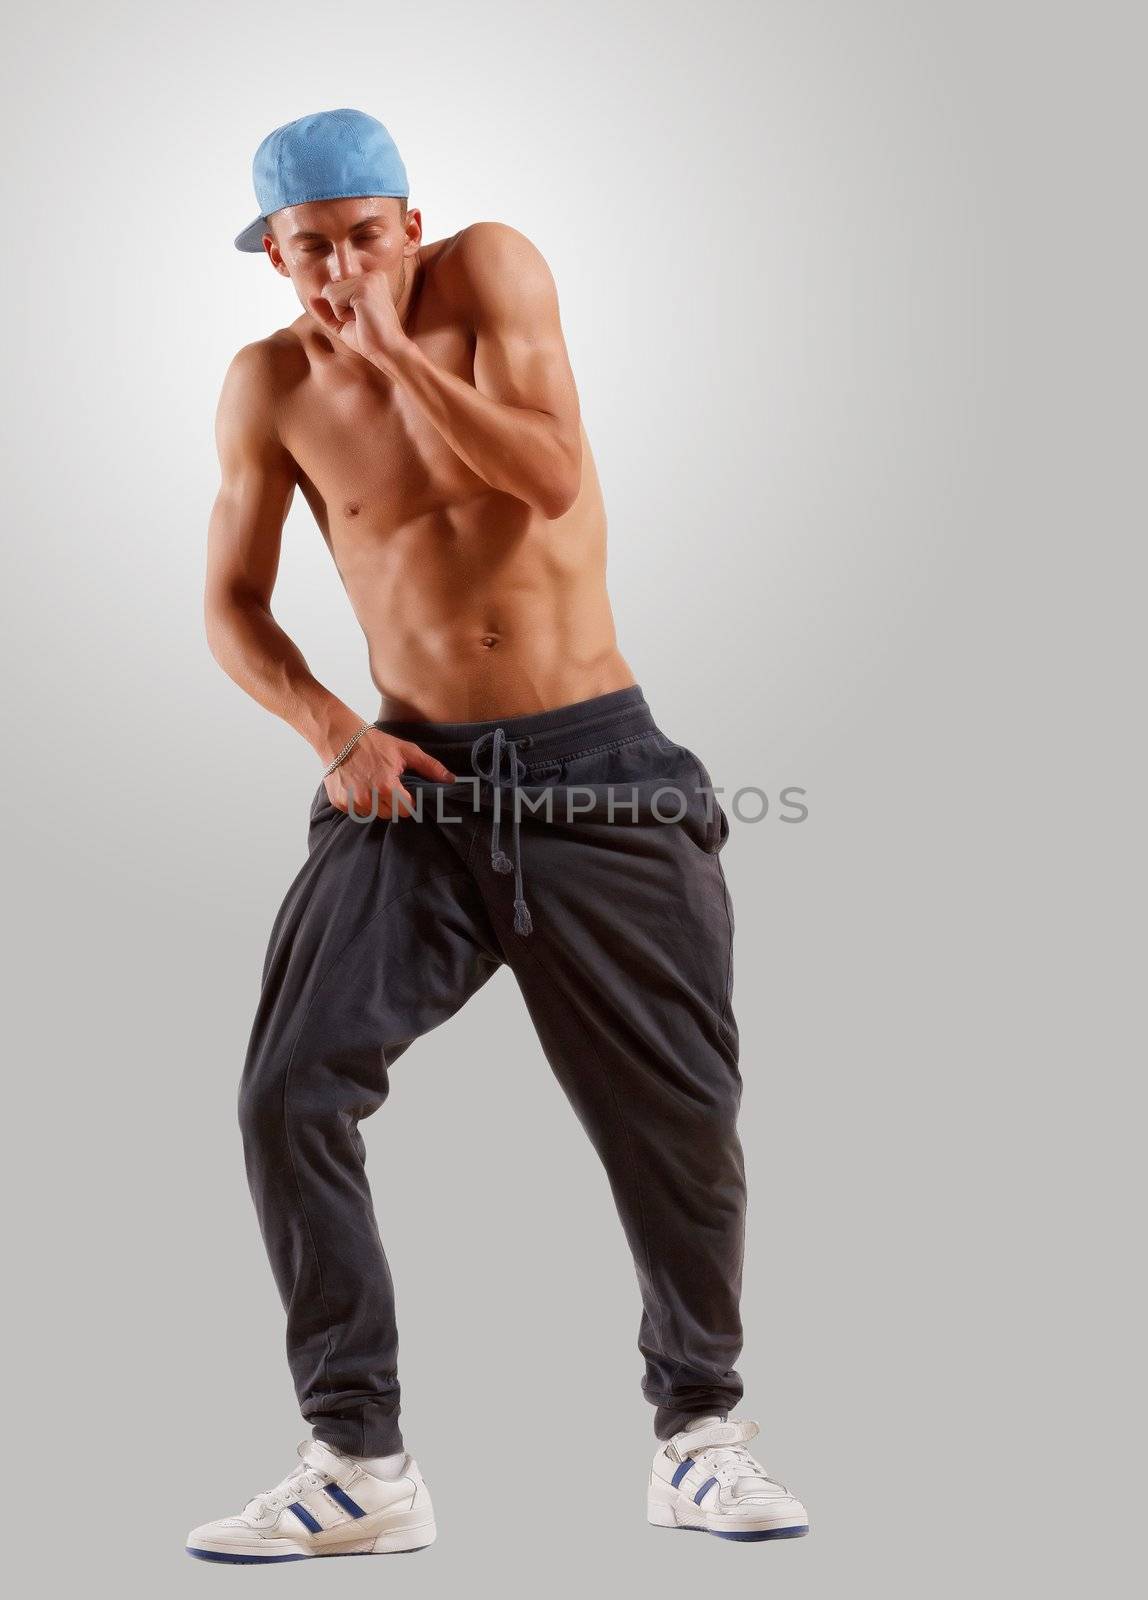 young man dancing hip hop by sergey_nivens